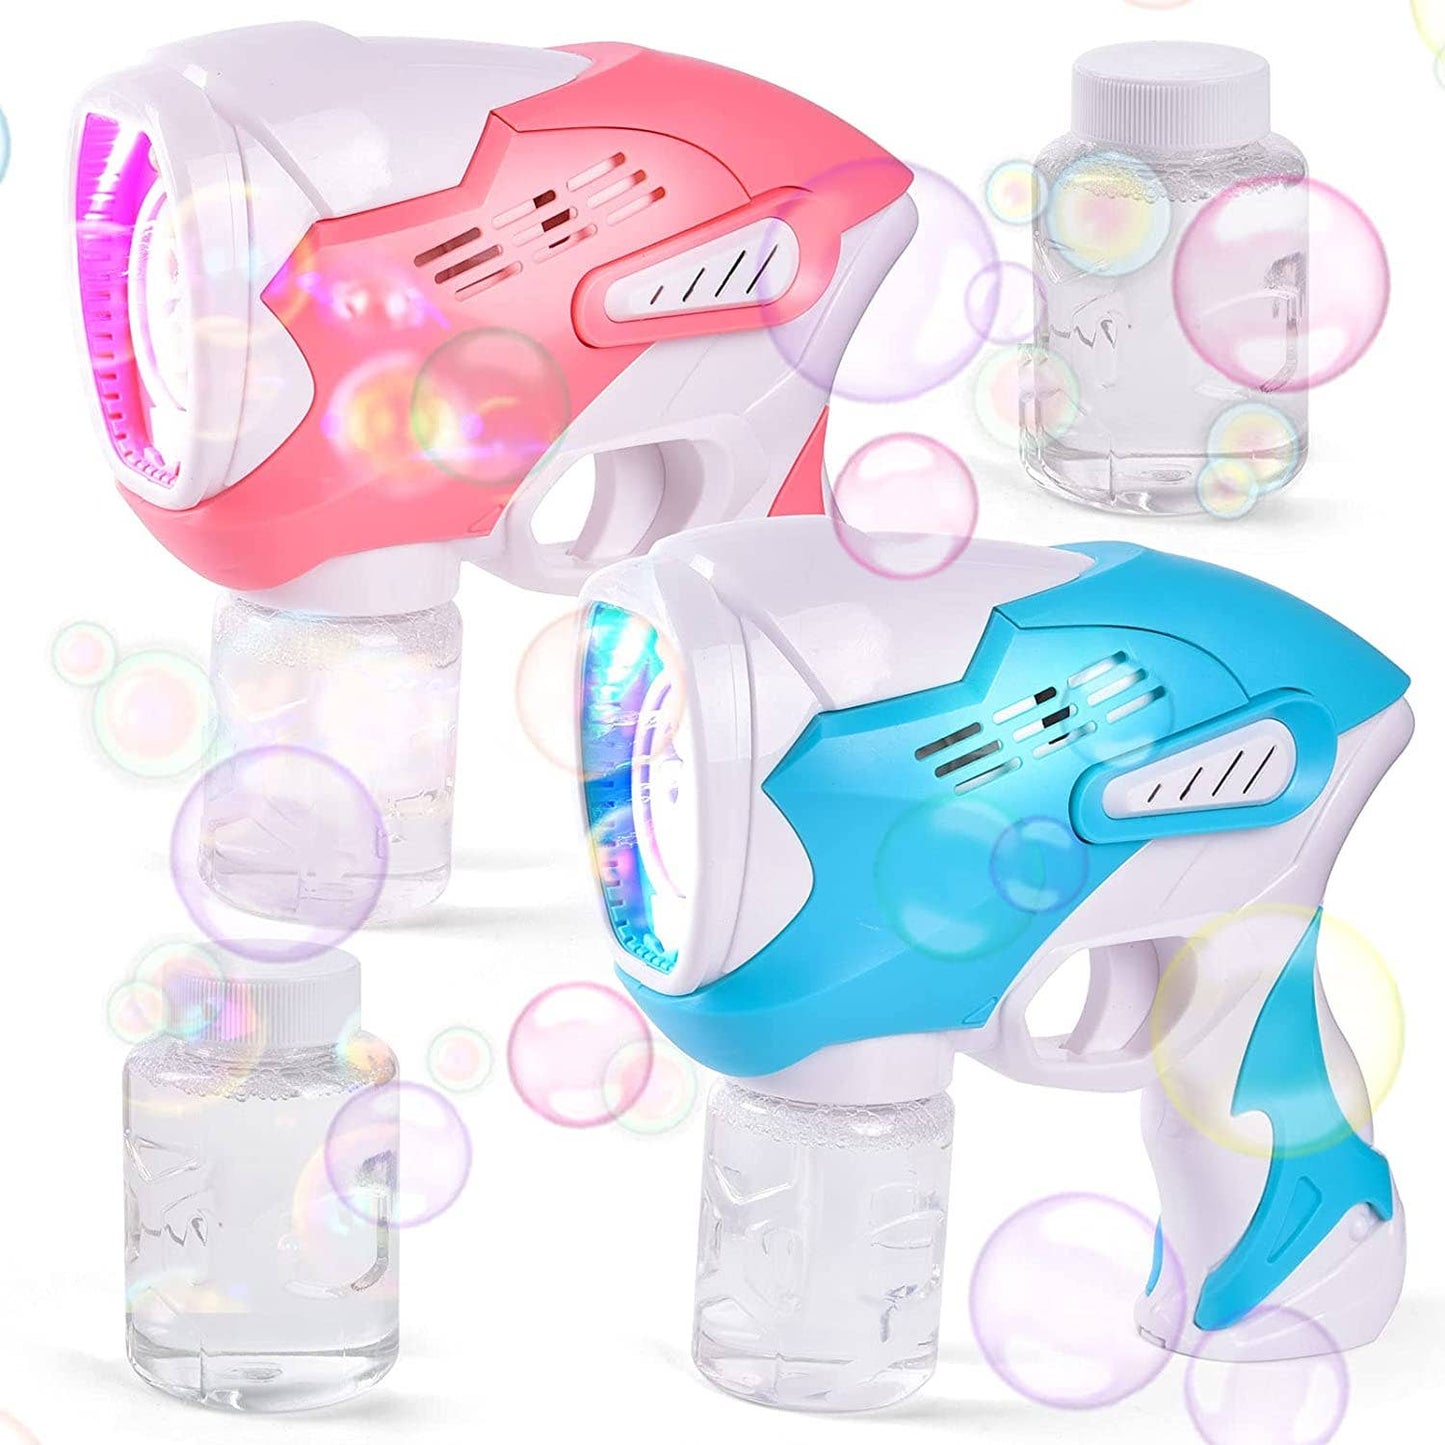 Fun Little Toys - 2 Bubble Guns with 4 Bottles Bubble Solutions for Kids